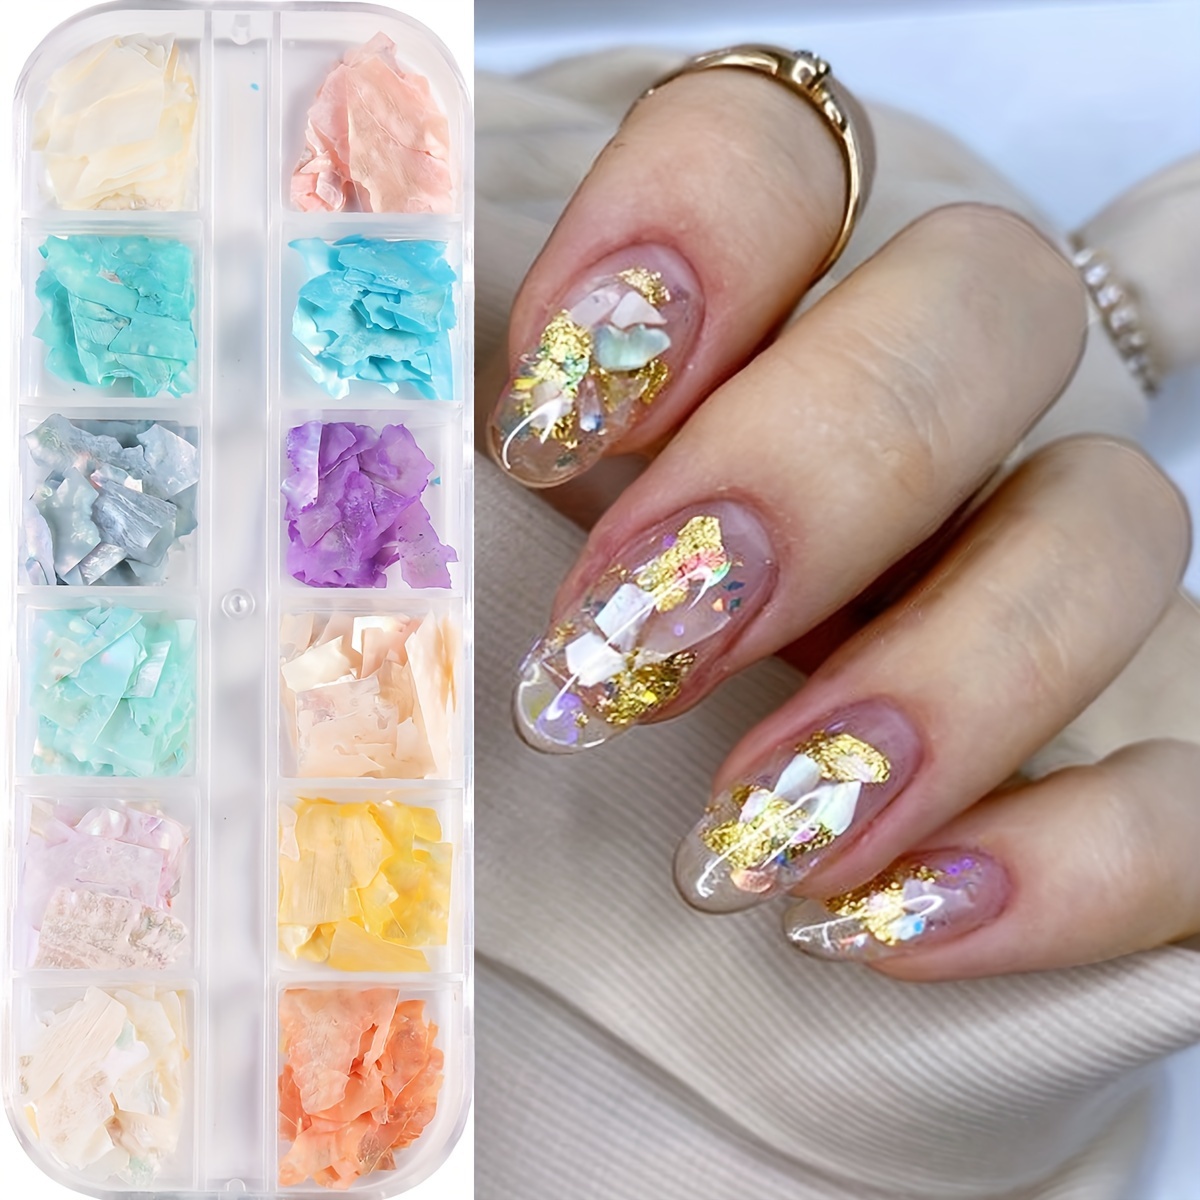 

12-grid Iridescent Abalone Shell Nail Art Decorations - Y2k Aesthetic, Mixed Colors, Shiny Seashell Sequins For Diy Manicures